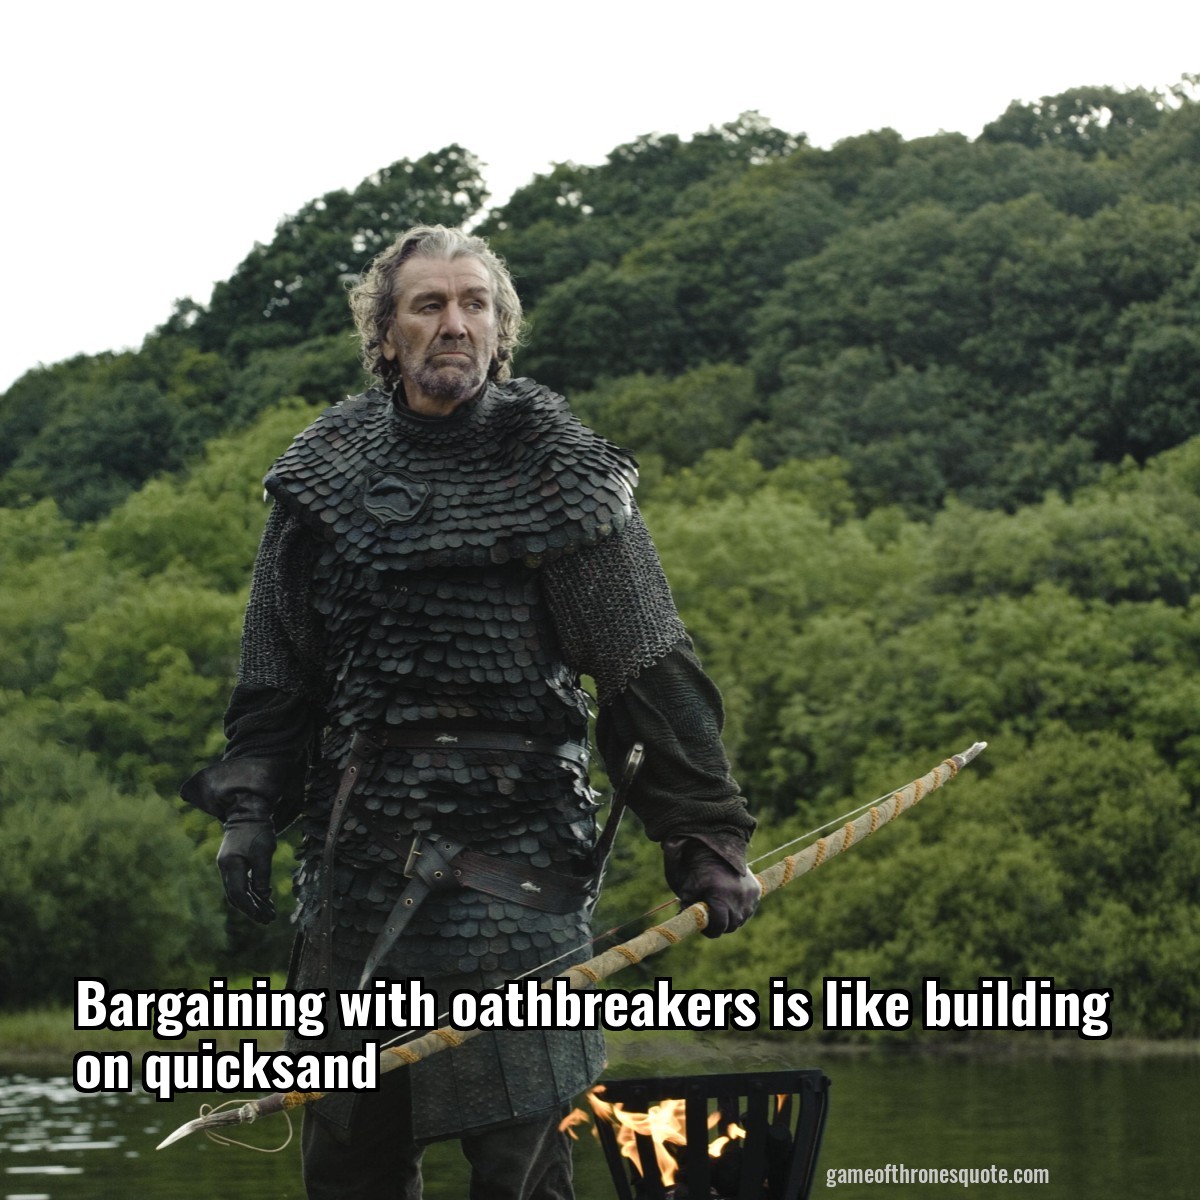 Bargaining with oathbreakers is like building on quicksand